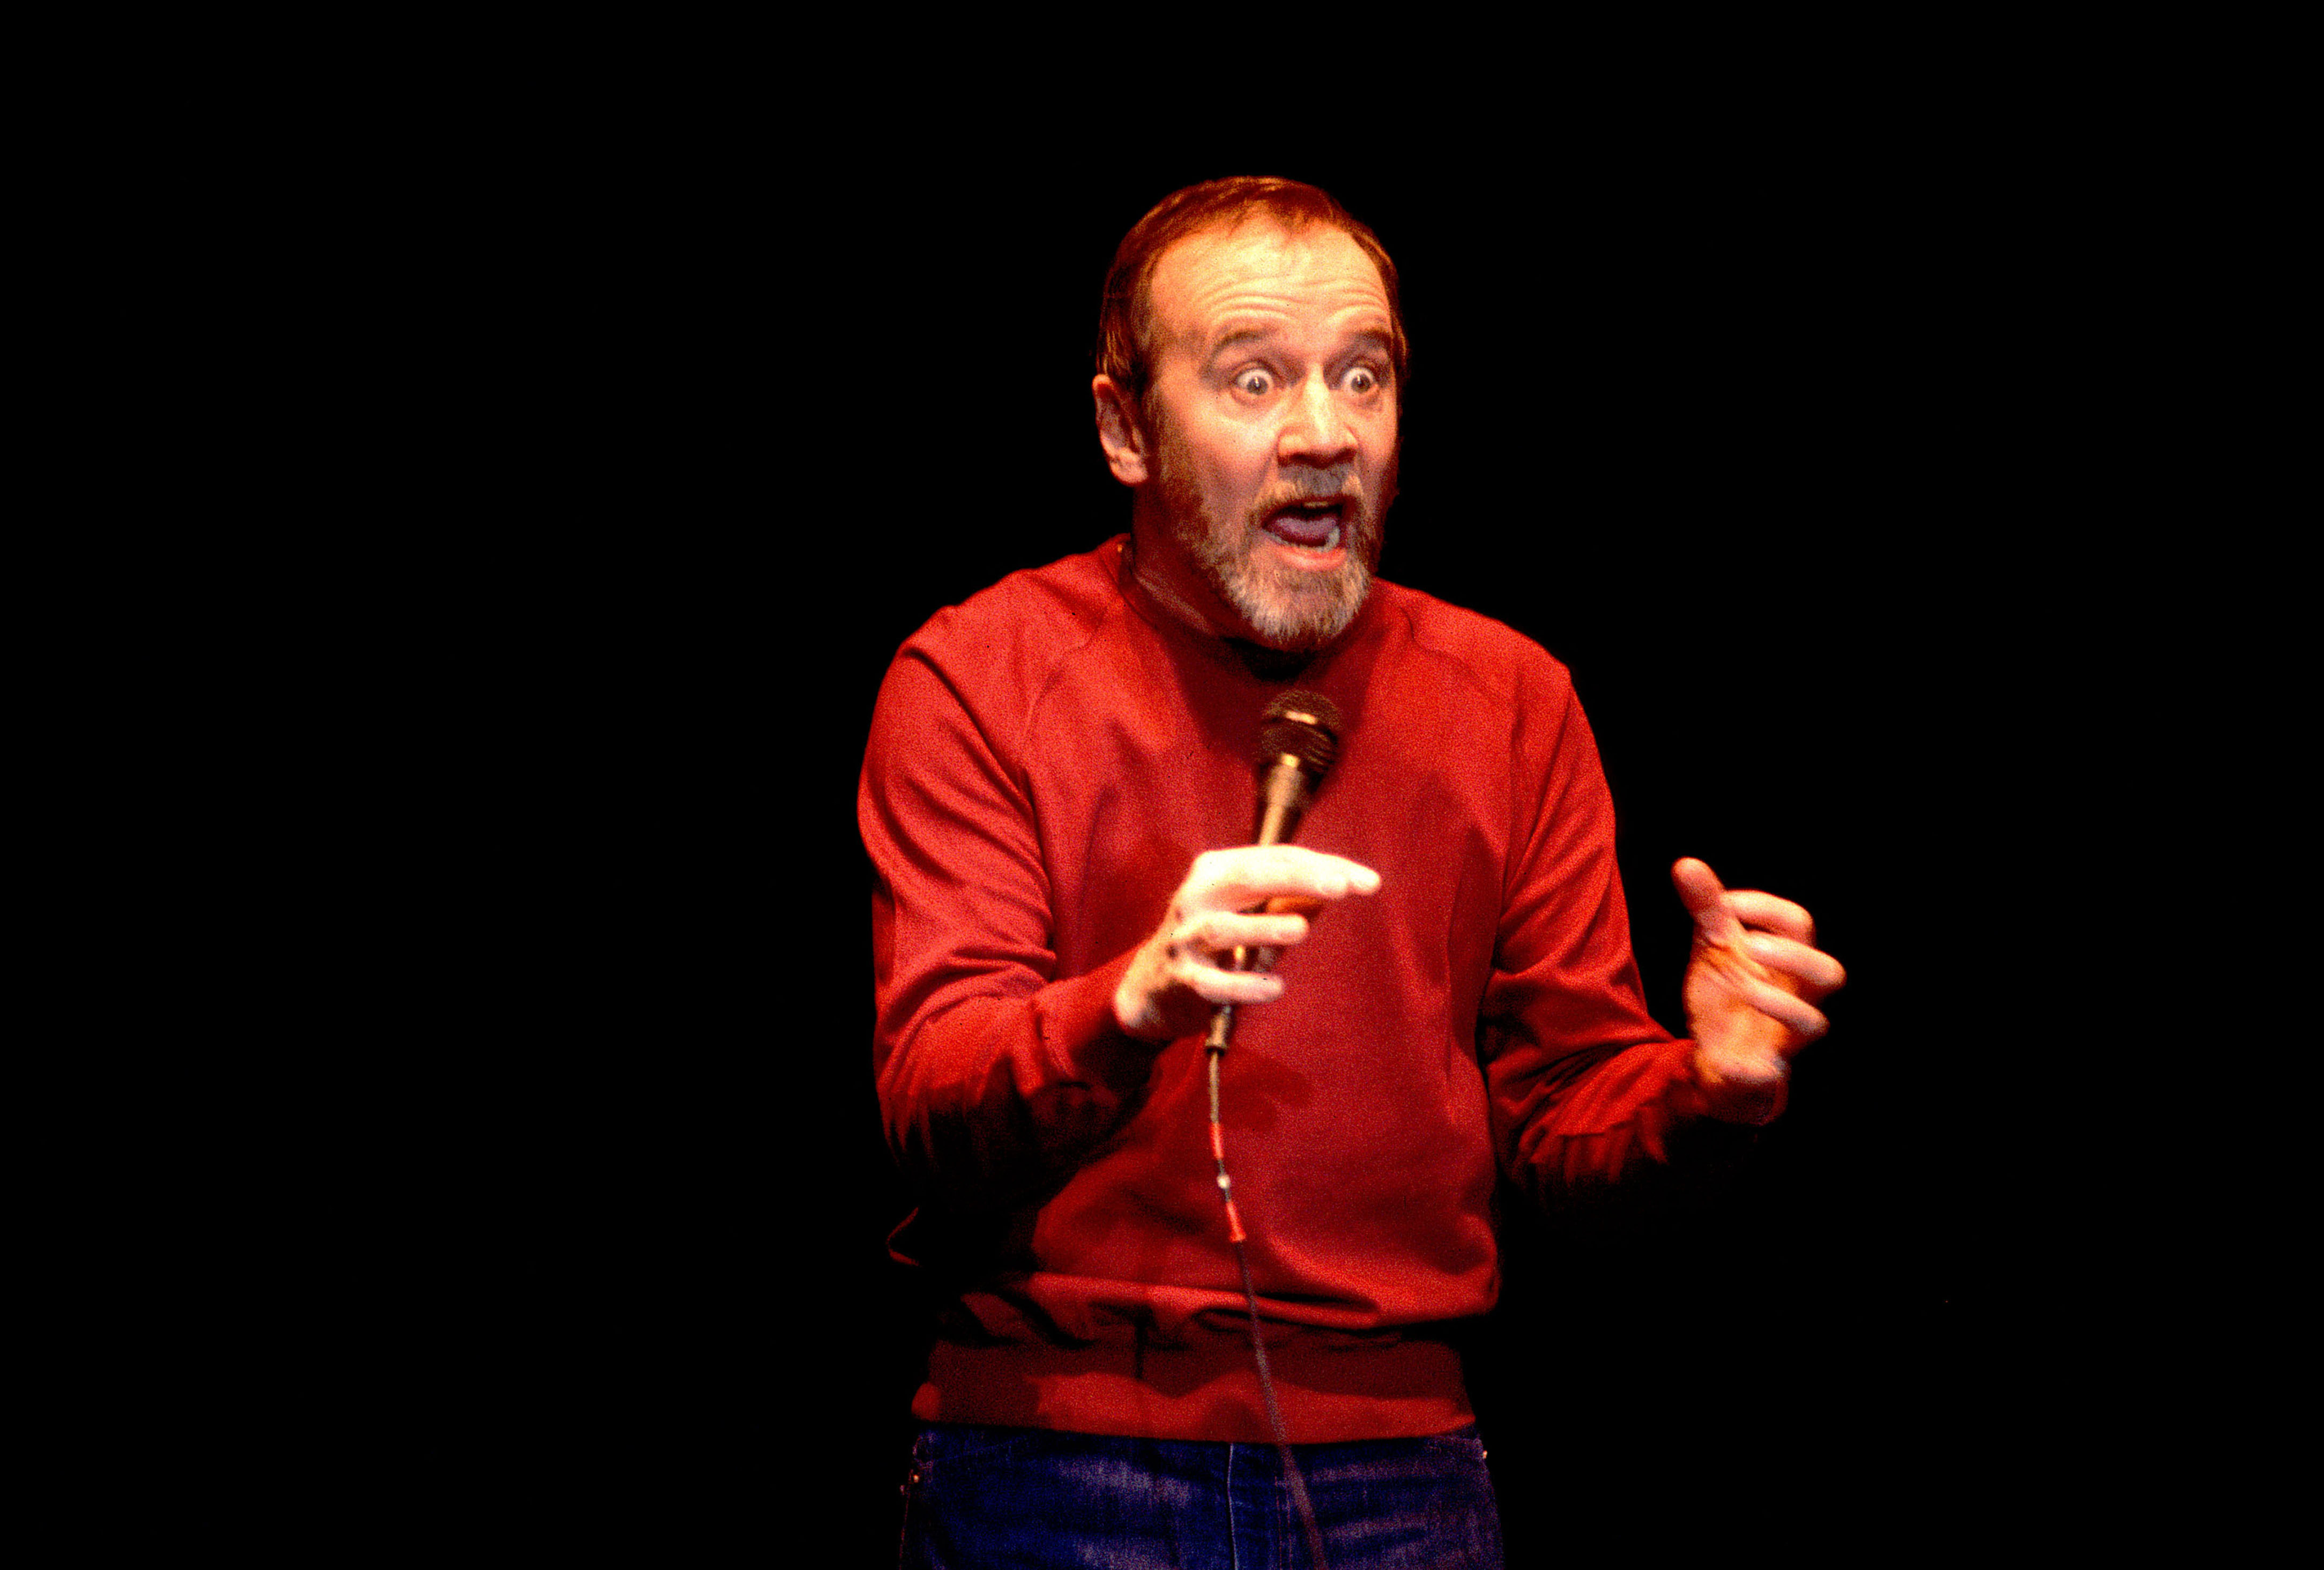 George Carlin performs on-stage. He is brightly lit while the background is black. He is an older white man with grey hair pulled back, a beard, and an exaggerated expression on his face.